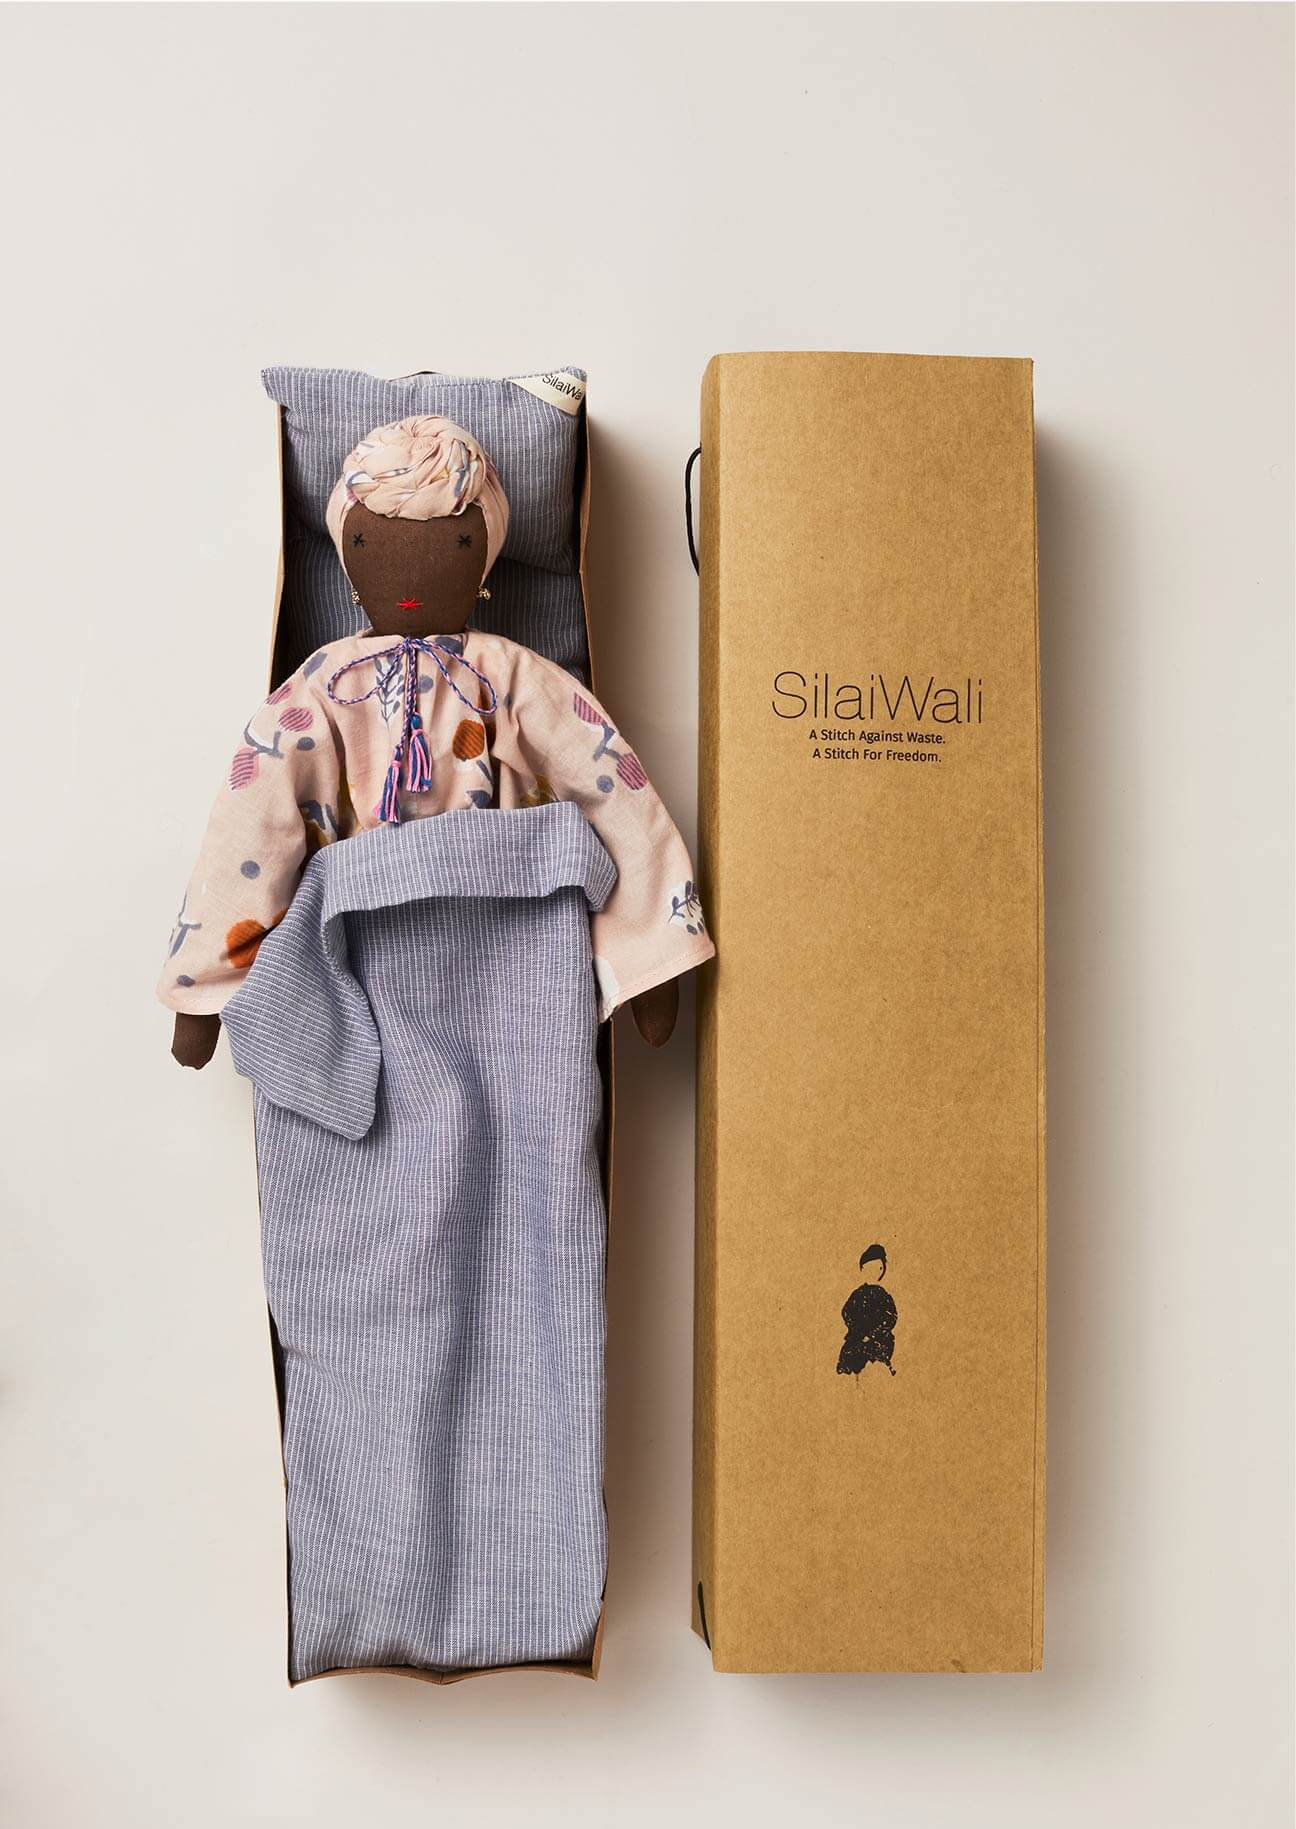 Upcycled doll with bedlinen inside SilaiWali cardboard gift box.